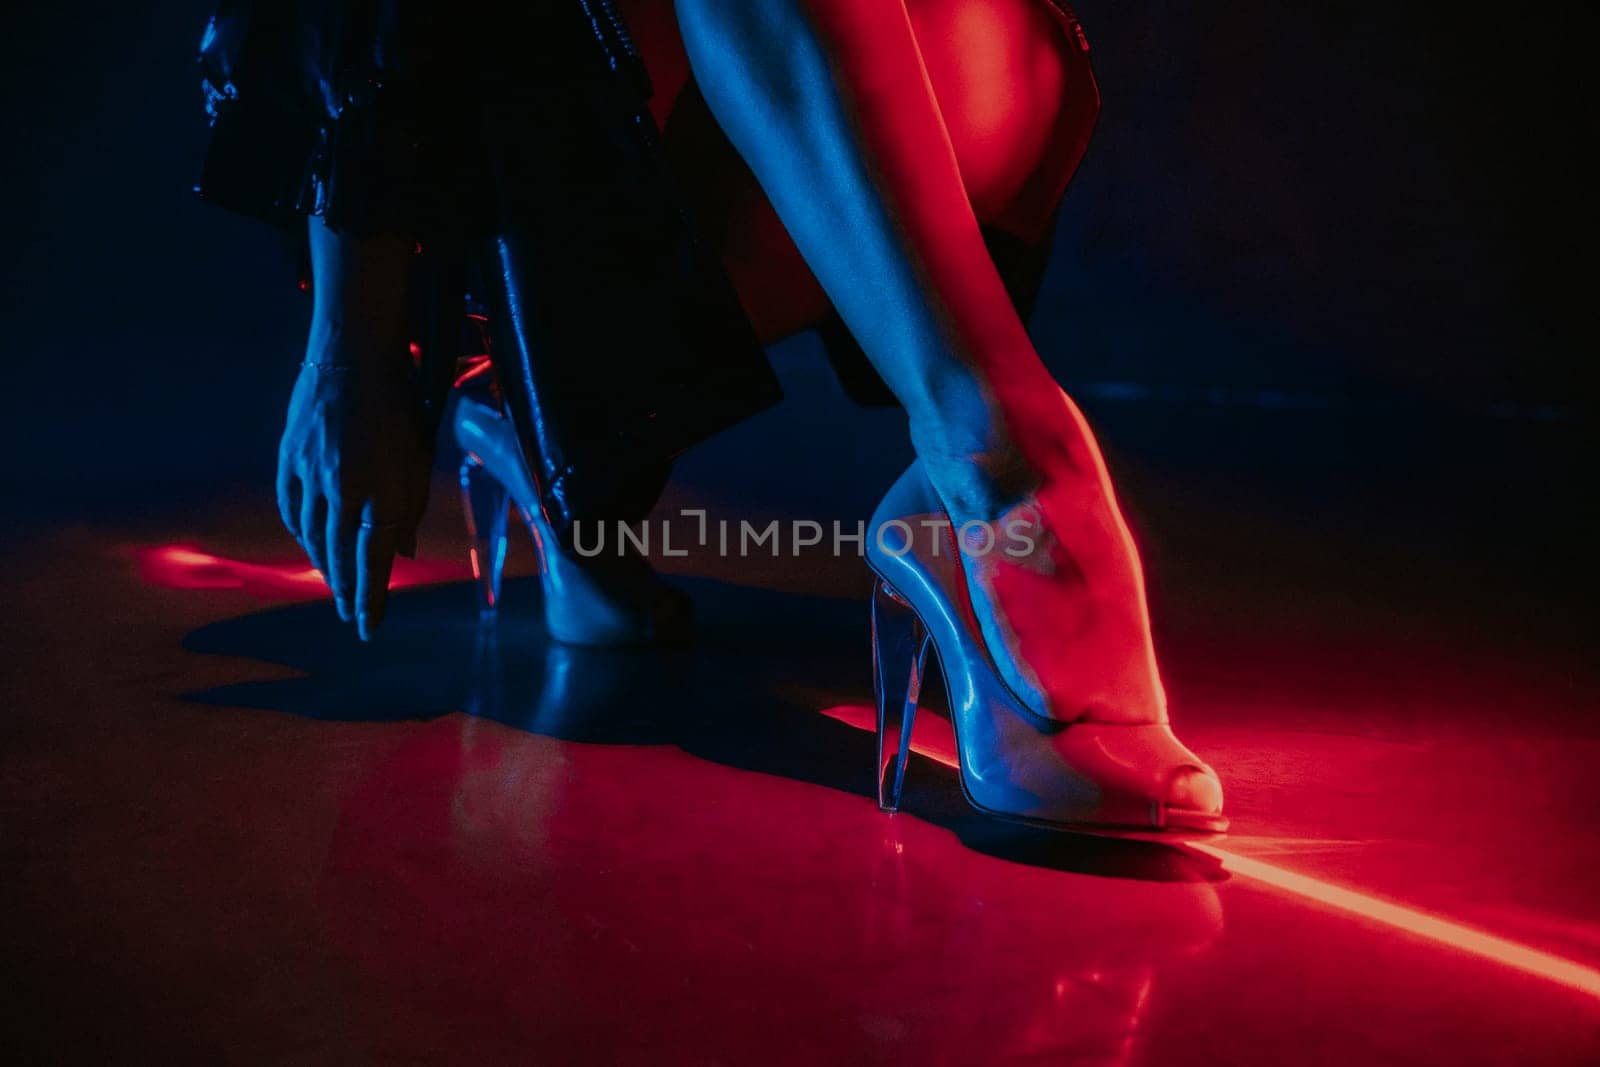 Legs of gorgeous woman in high heels shoes under red illumination, laser light, neon club. Projection illusion mapping by kristina_kokhanova